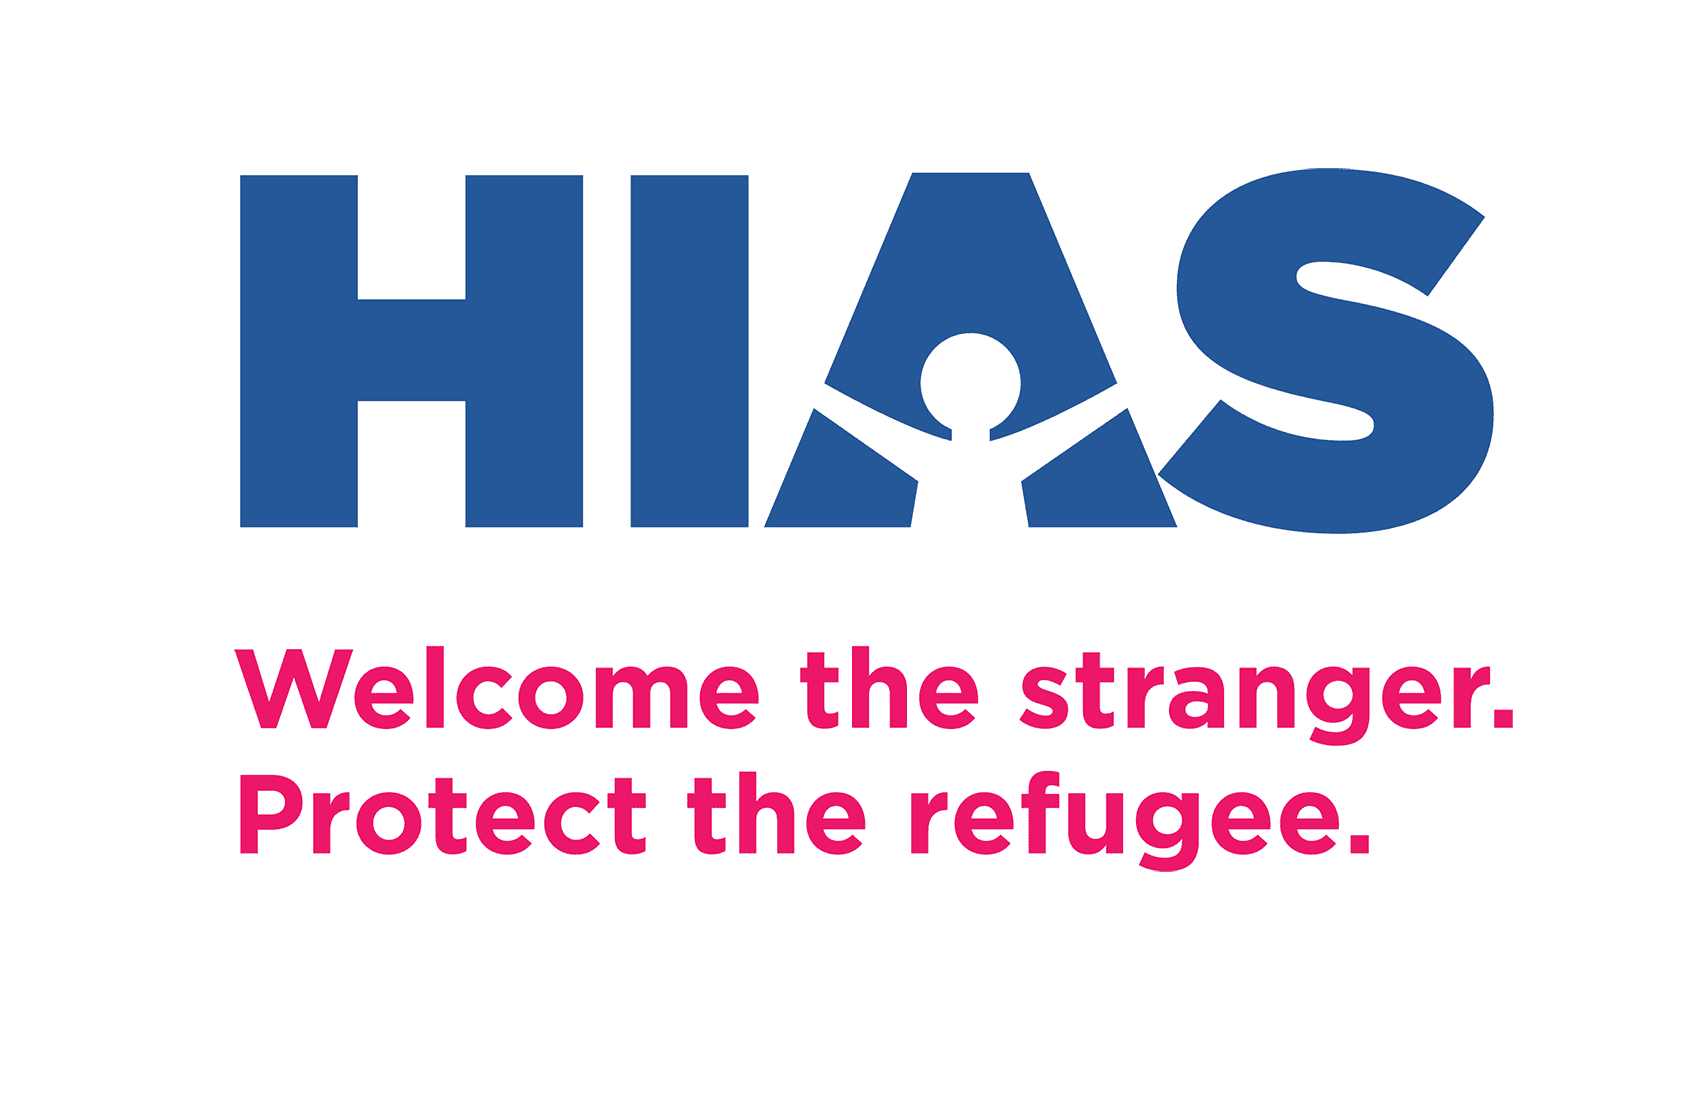 1,500+ Rabbis Sign National Letter Calling for Welcoming Refugees